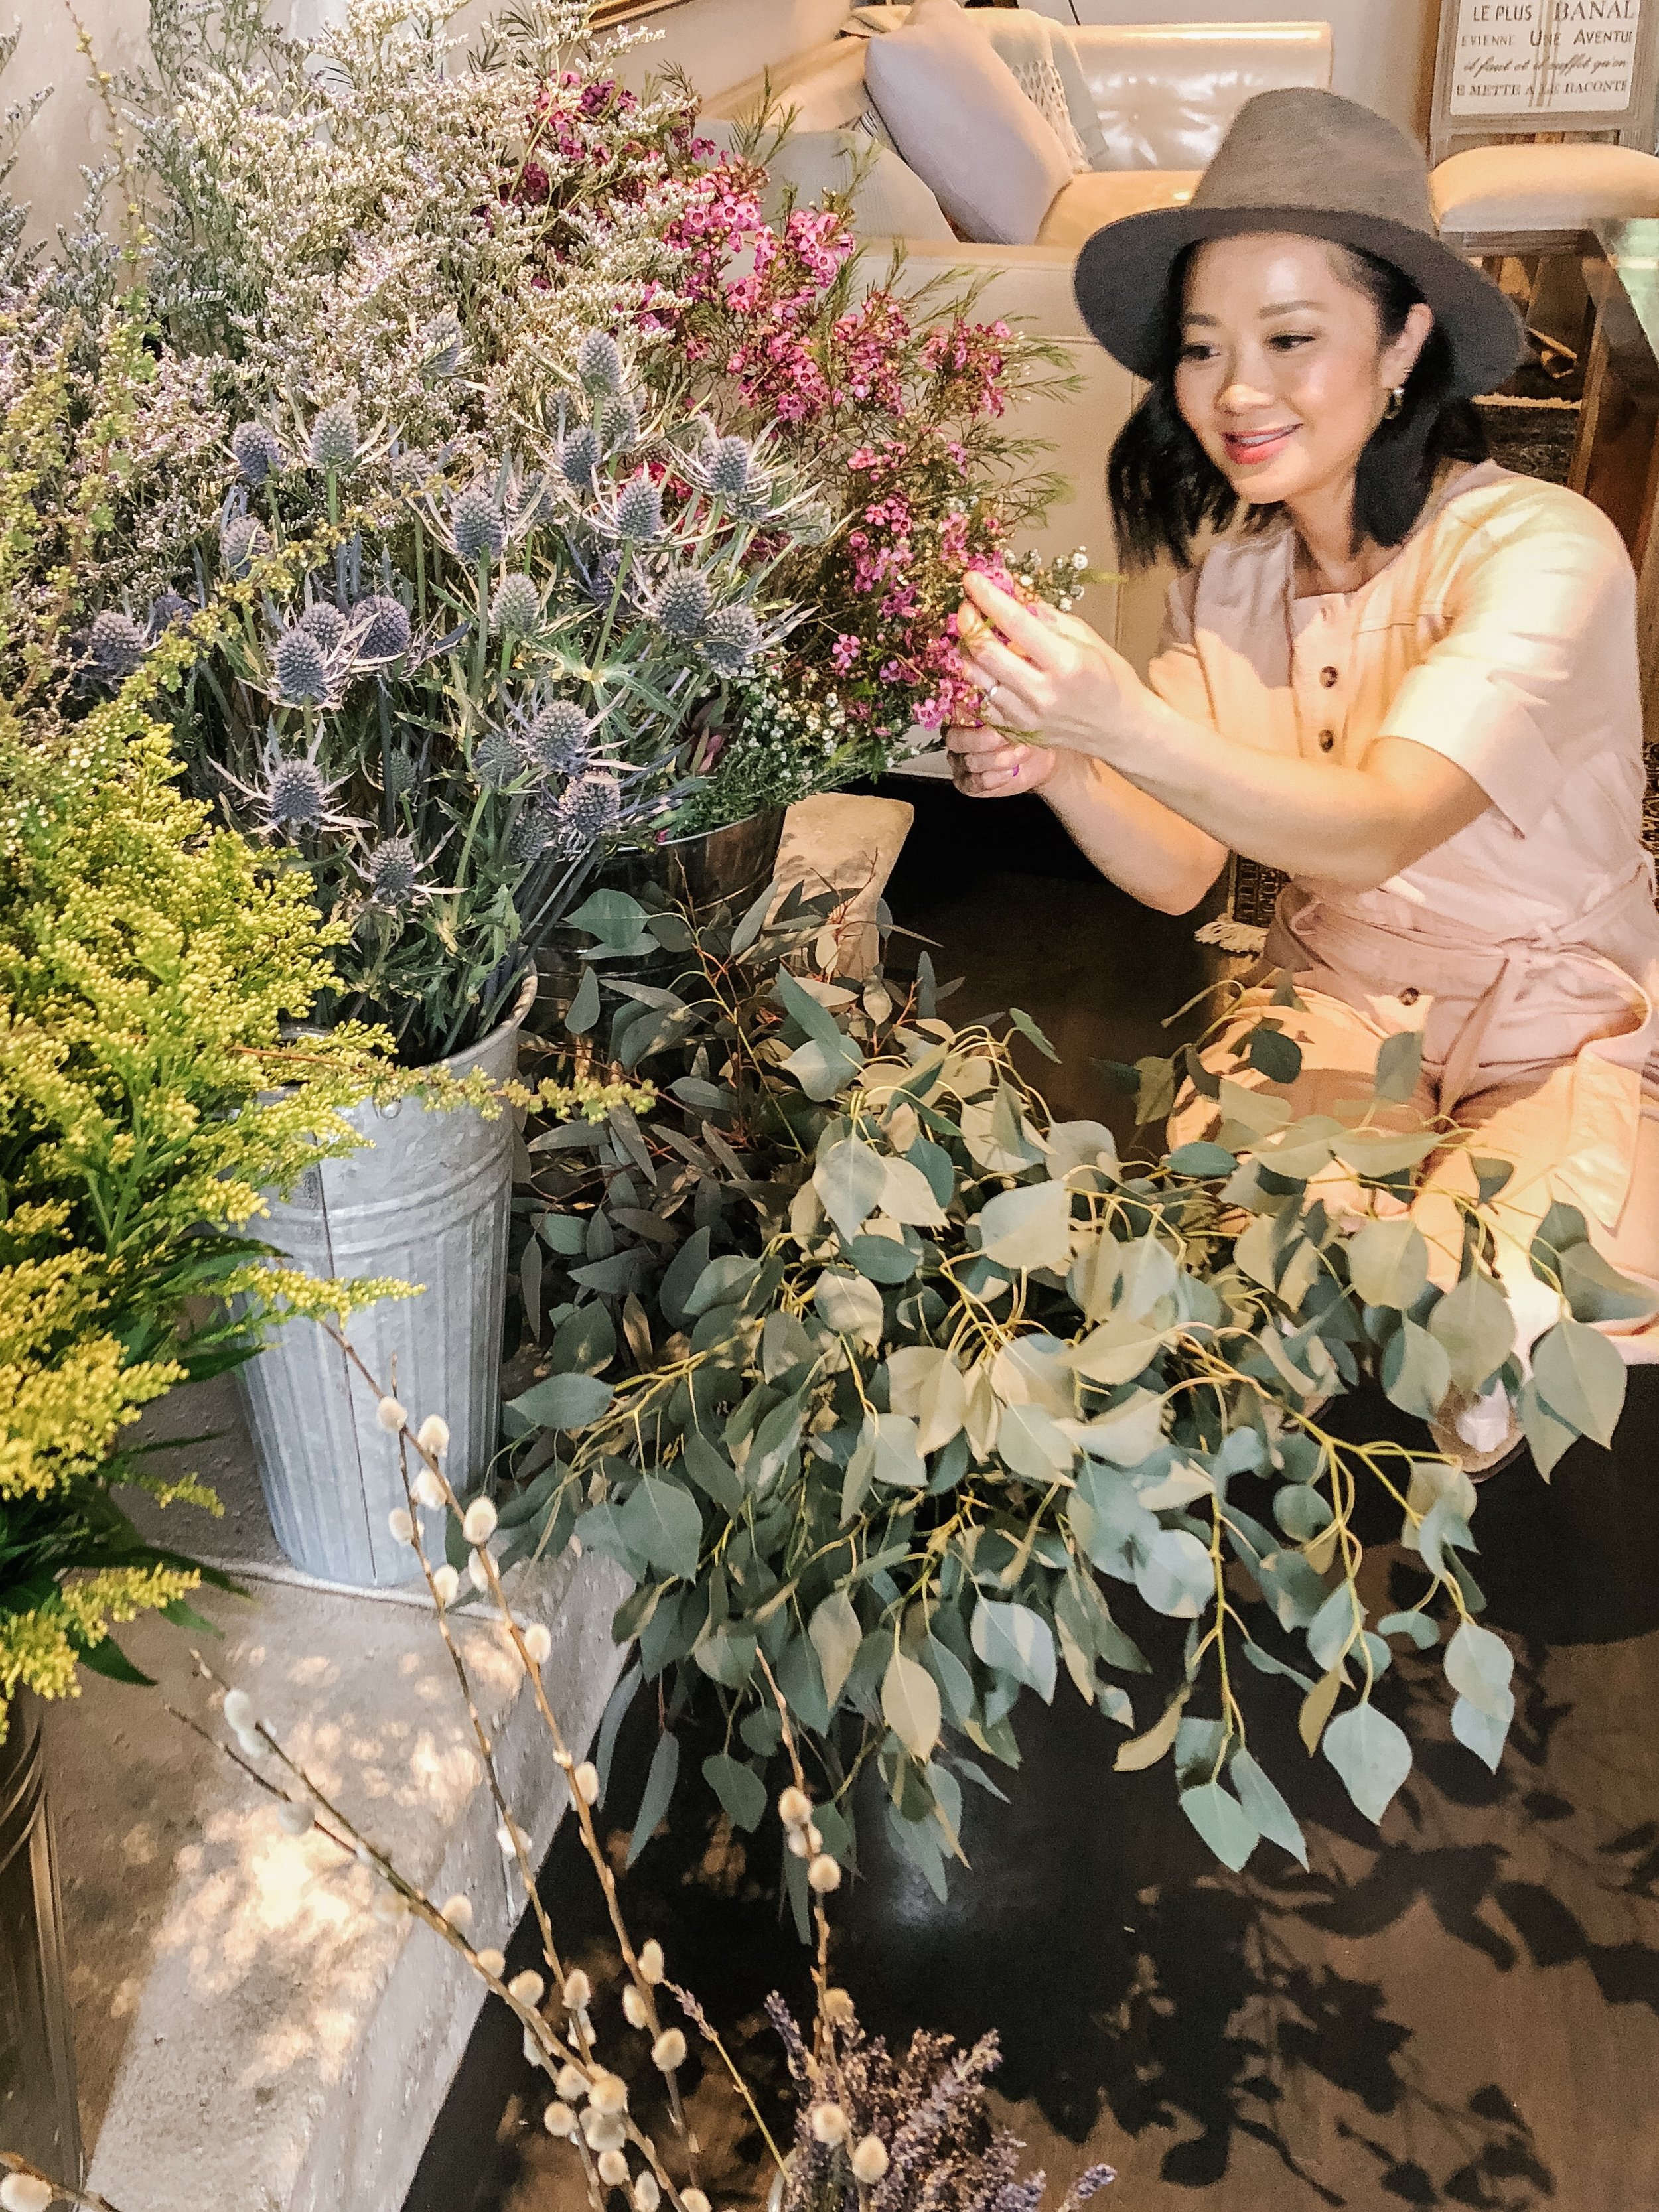 Meet Erica, the founder of Thistle Botanicals - Floral and Plants Design in Vancouver, BC